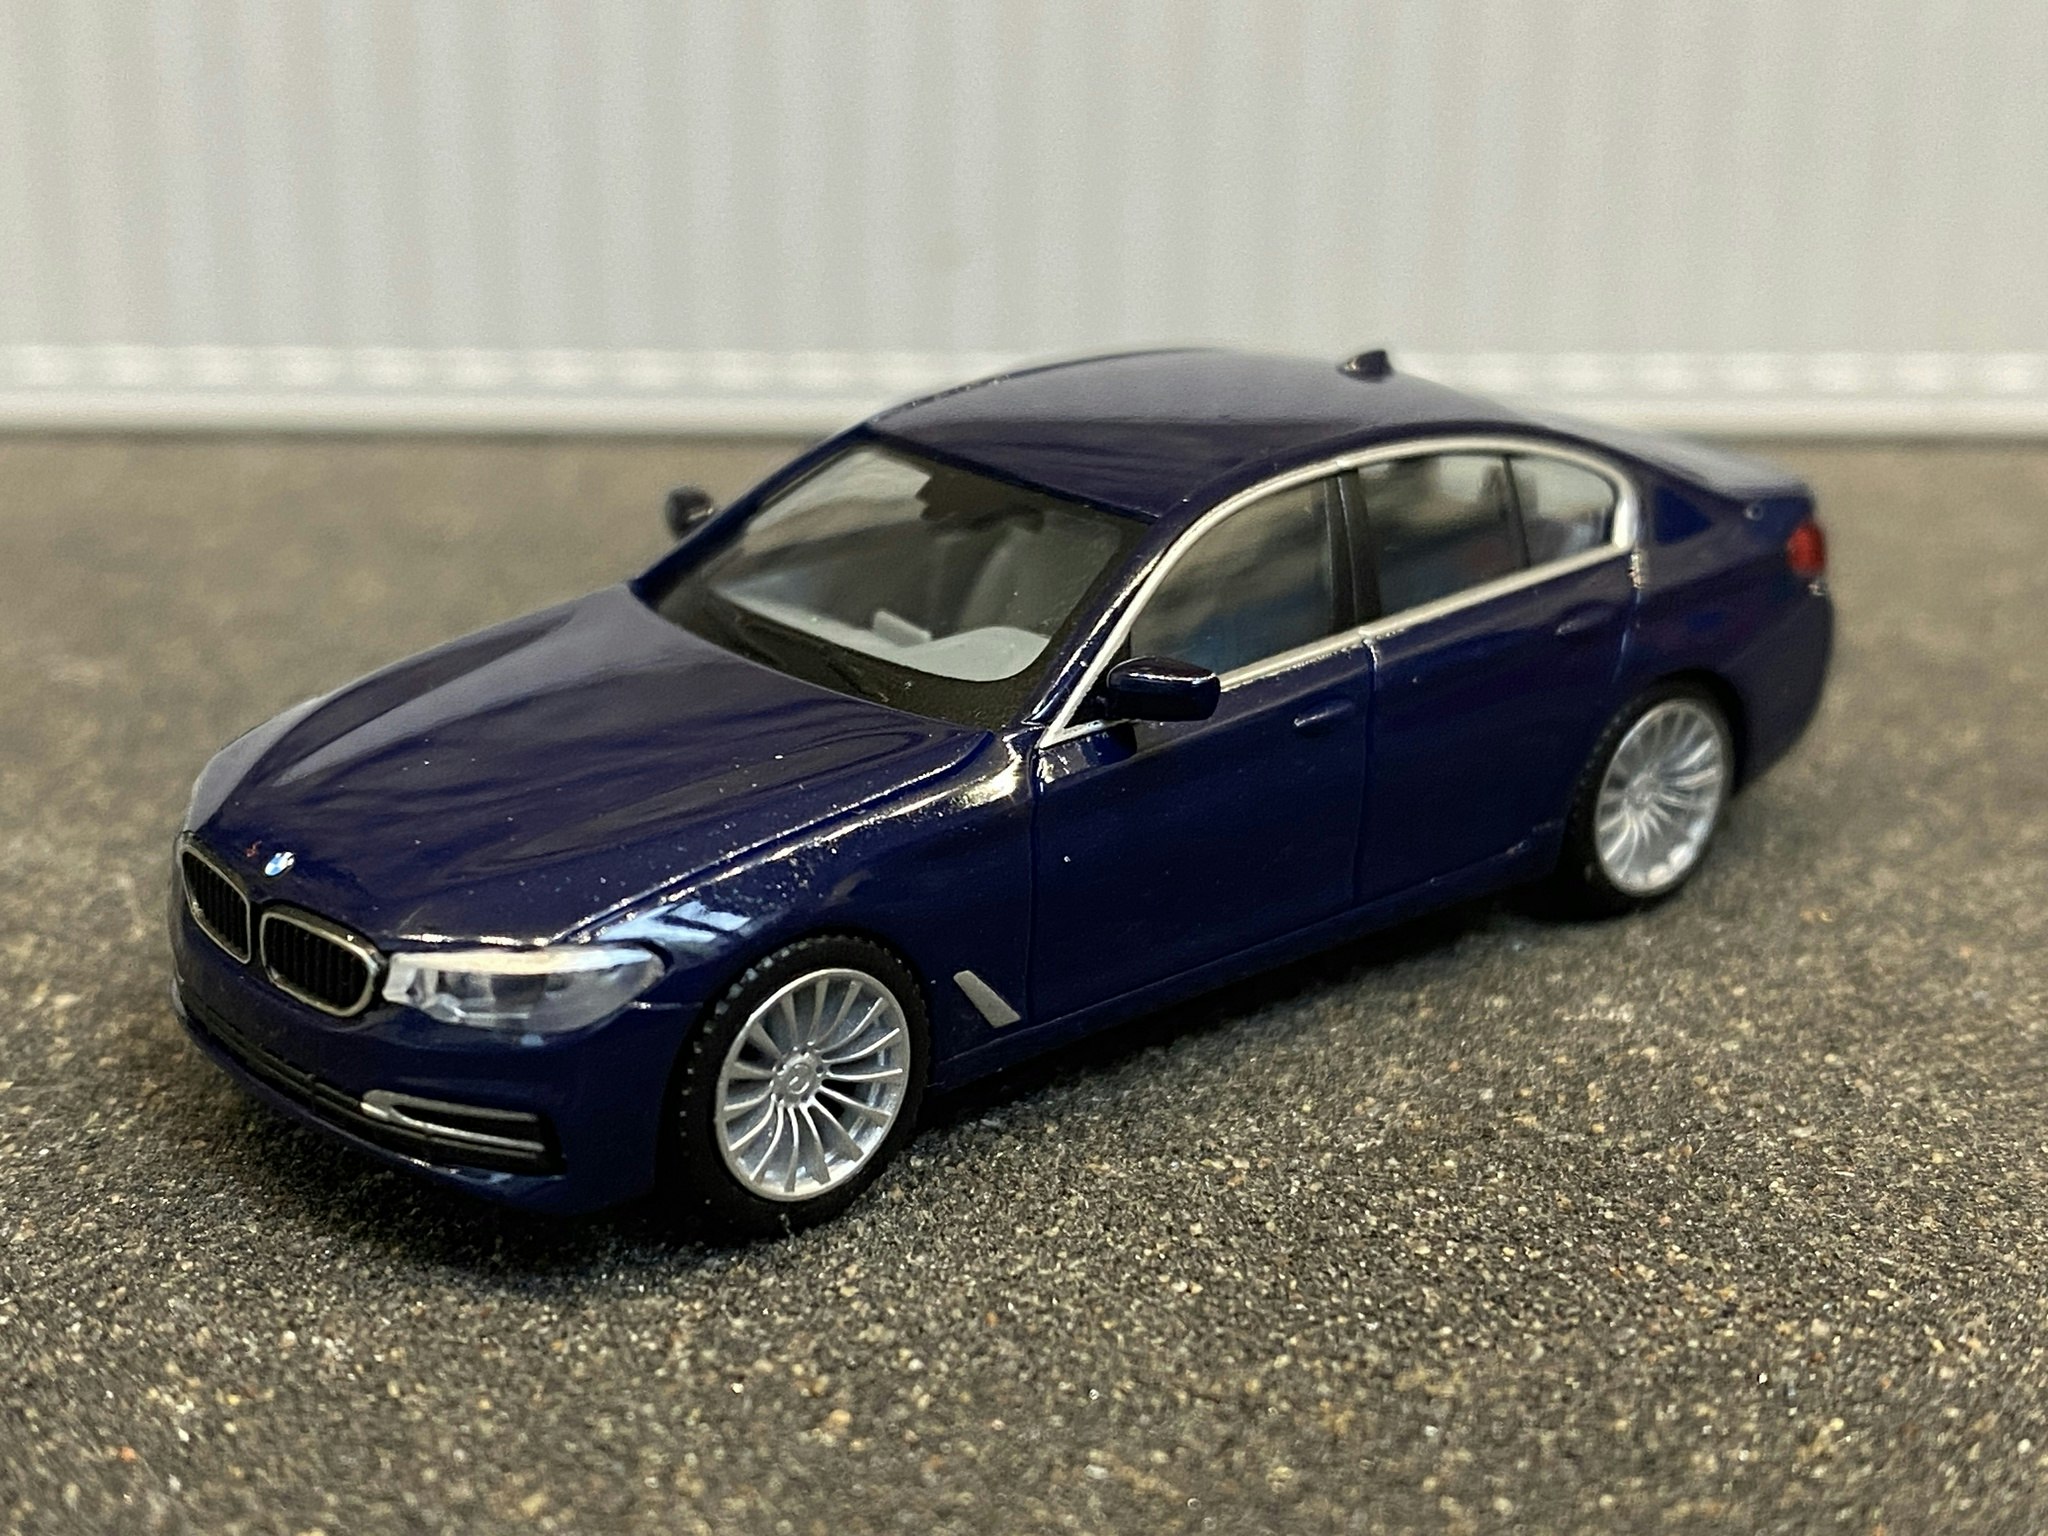 Scale 1/87 H0, BMW 5 series LIMO TM, Dark blue from Herpa